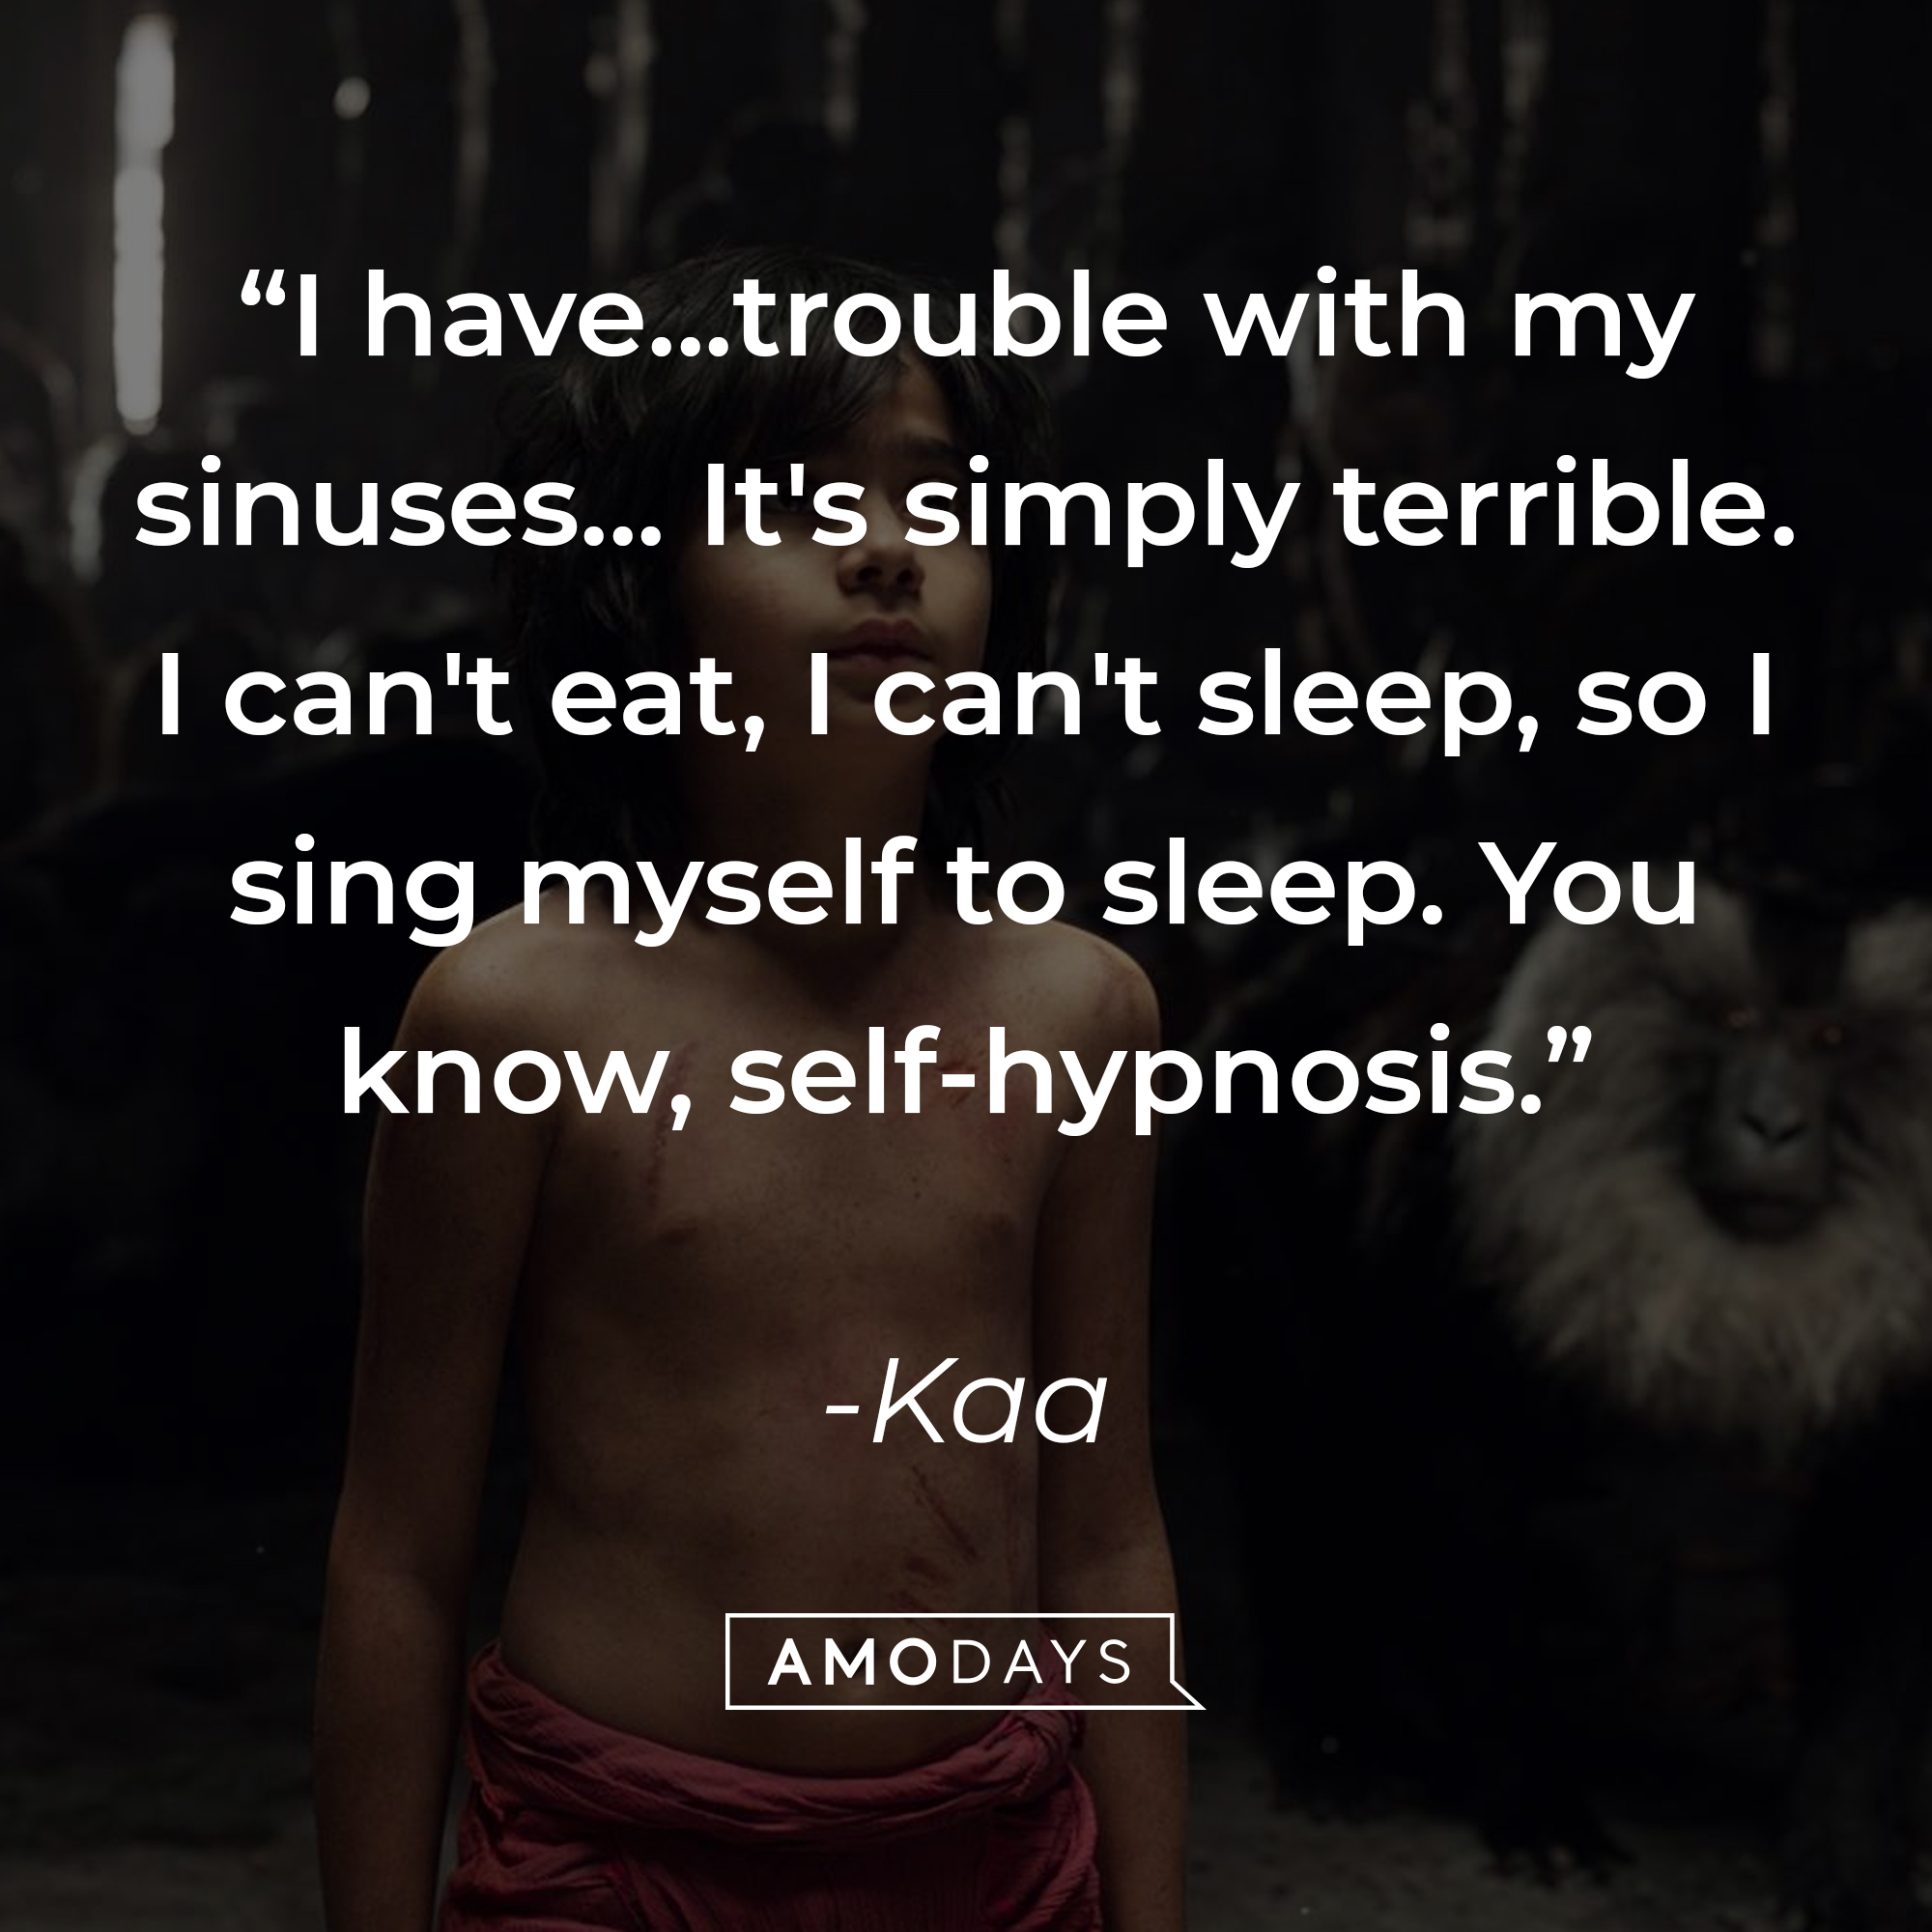 Kaa's quote: "I have...trouble with my sinuses... It's simply terrible. I can't eat, I can't sleep, so I sing myself to sleep. You know, self-hypnosis." | Source: facebook.com/DisneyJungleBook